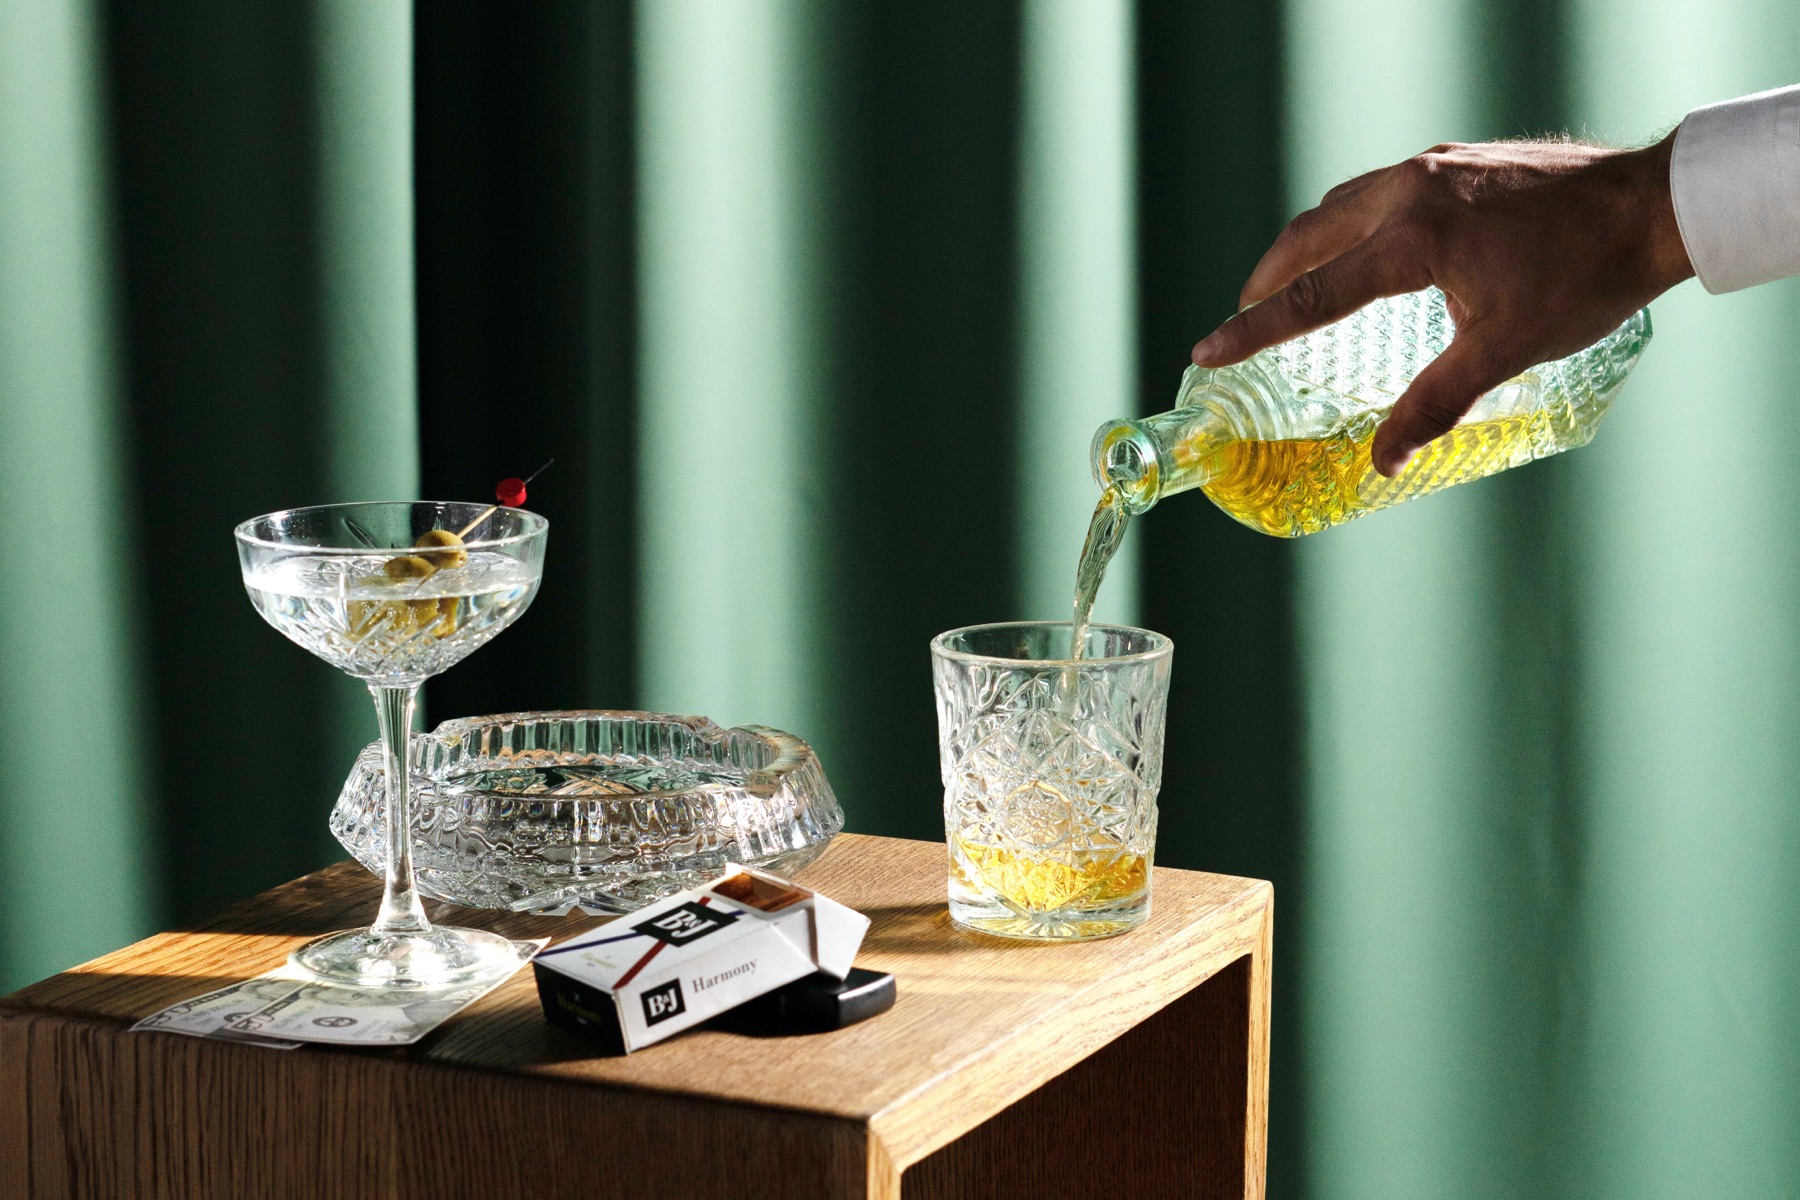 Image of a hand pouring a drink into a crystal glass with another cocktail and cigarettes on the table in front of a green background.